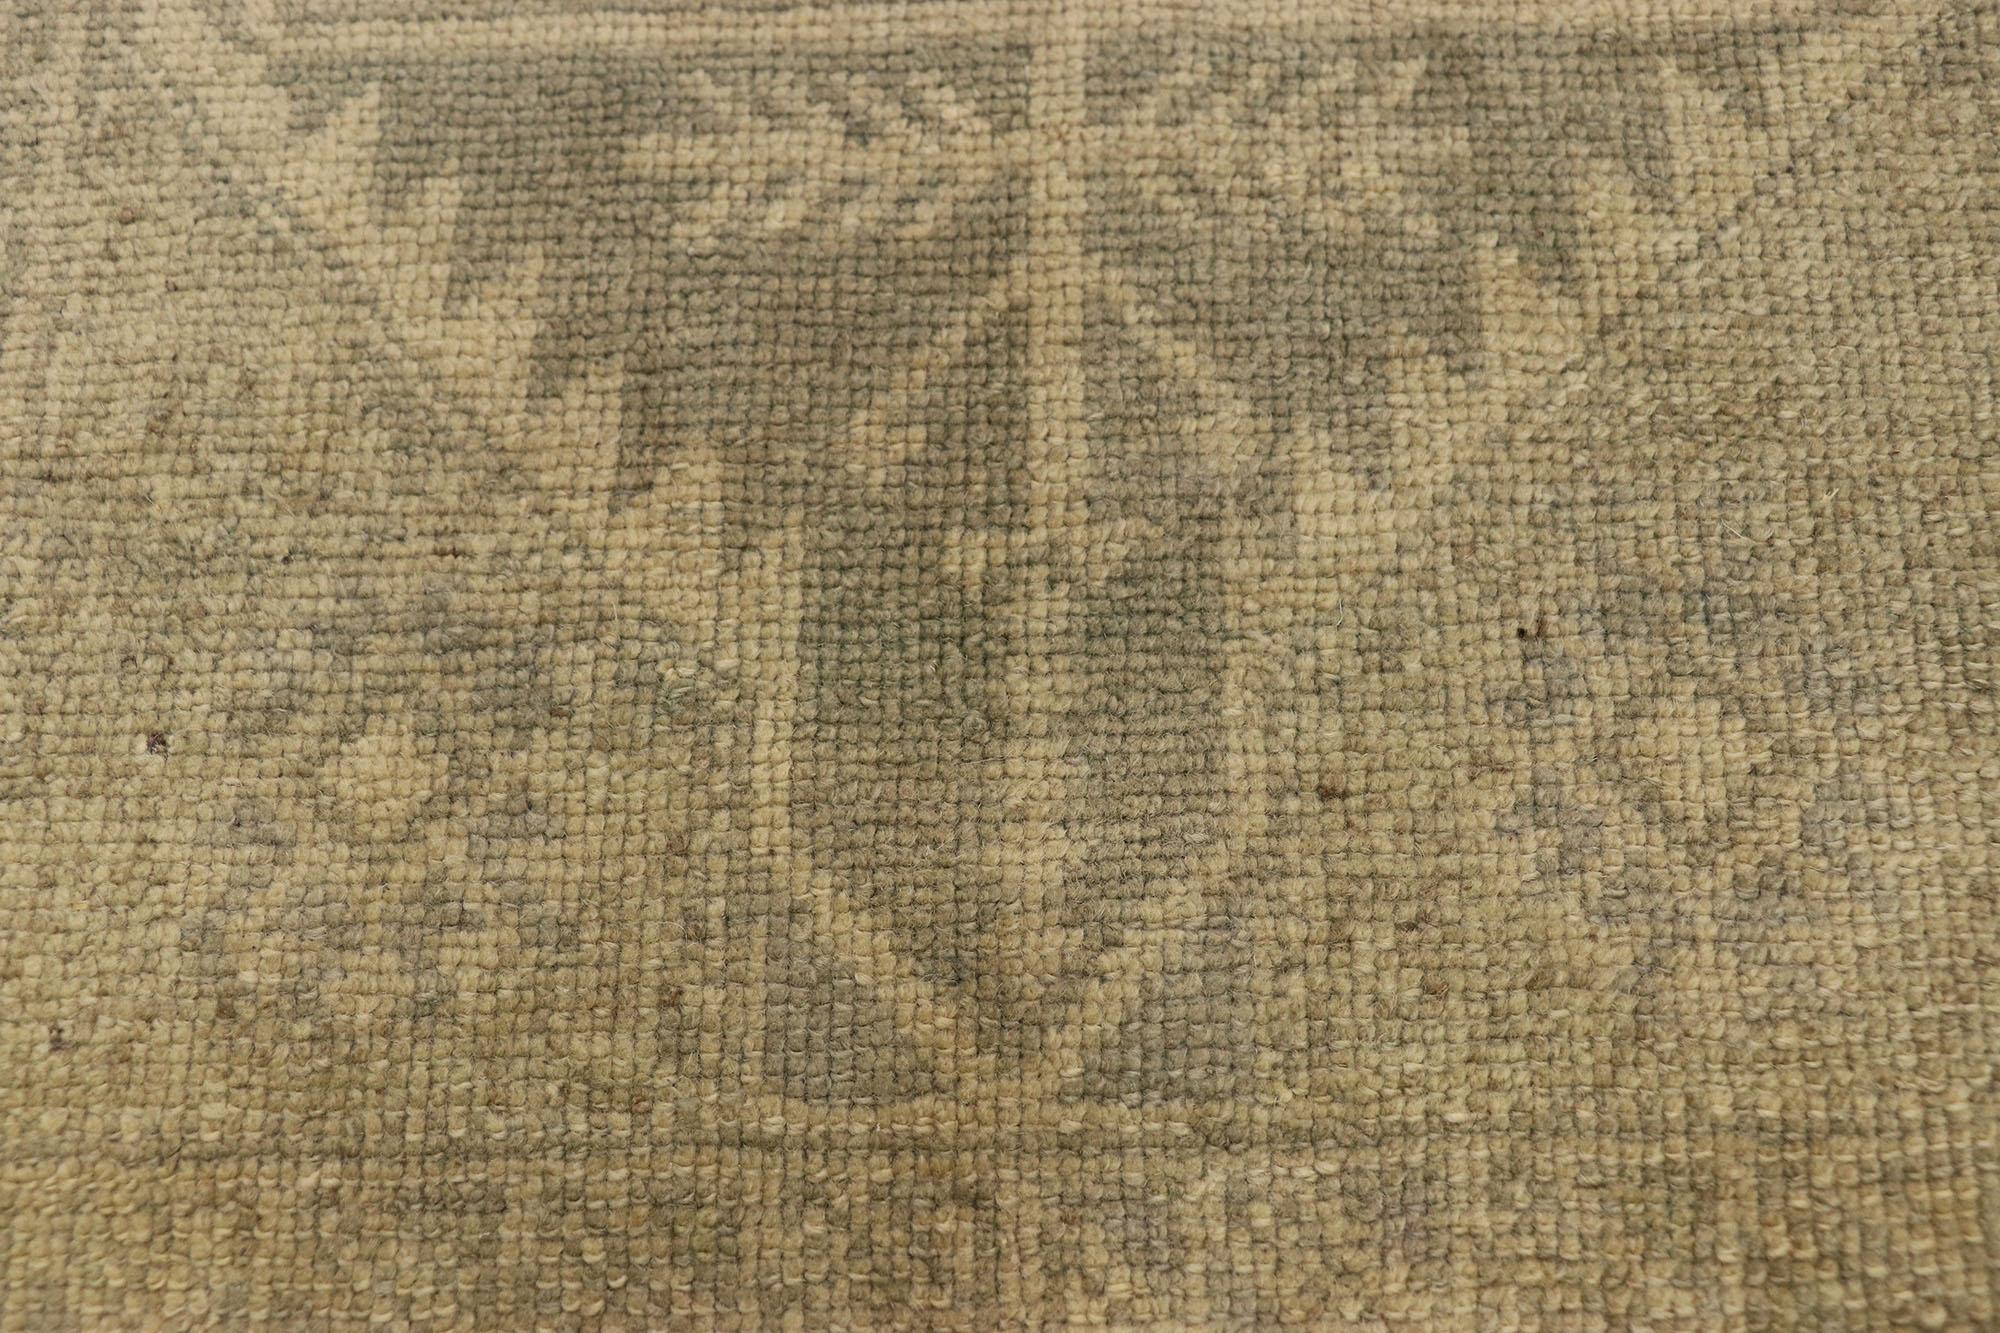 Neutral Earth-Tone Vintage Turkish Oushak Yastik Rug In Good Condition For Sale In Dallas, TX